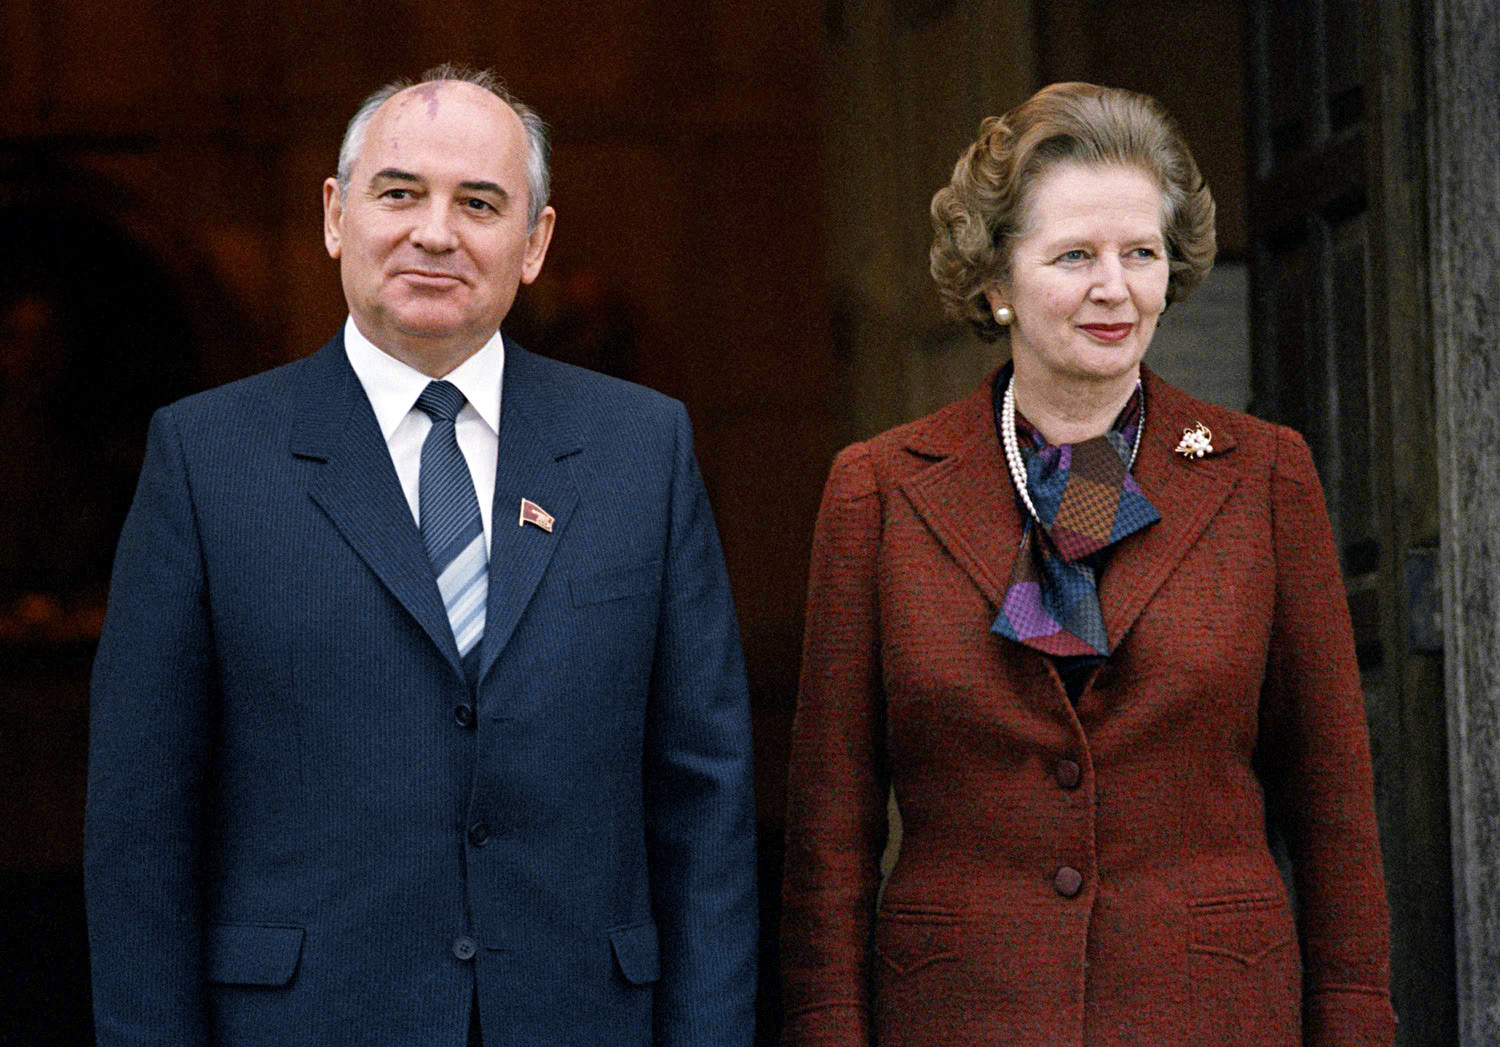 Gorbachev and Thatcher refused reciprocal claims on Tsarist-era debts